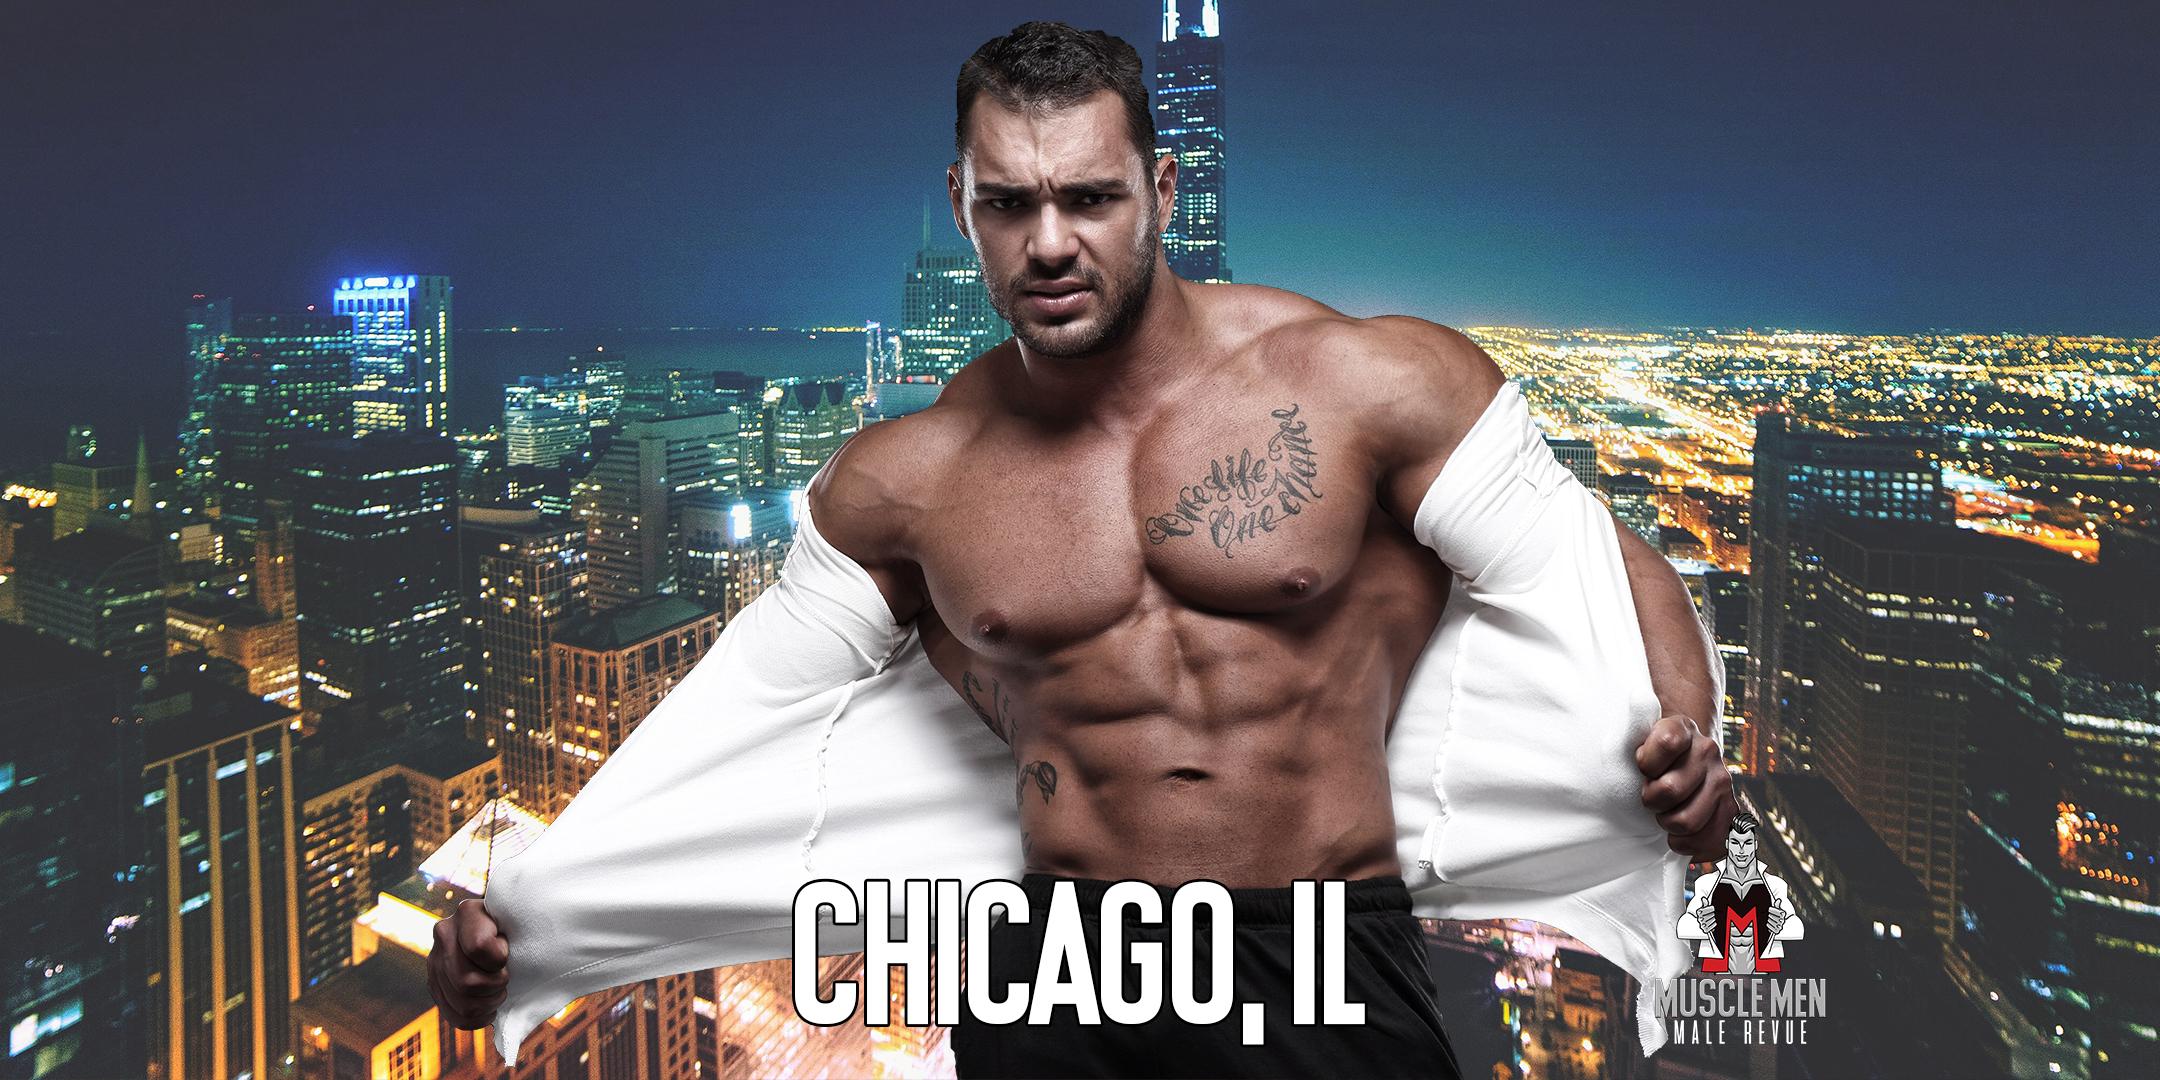 Muscle Men Male Strippers Revue & Male Strip Club Shows Chicago IL - 8PM to 10PM